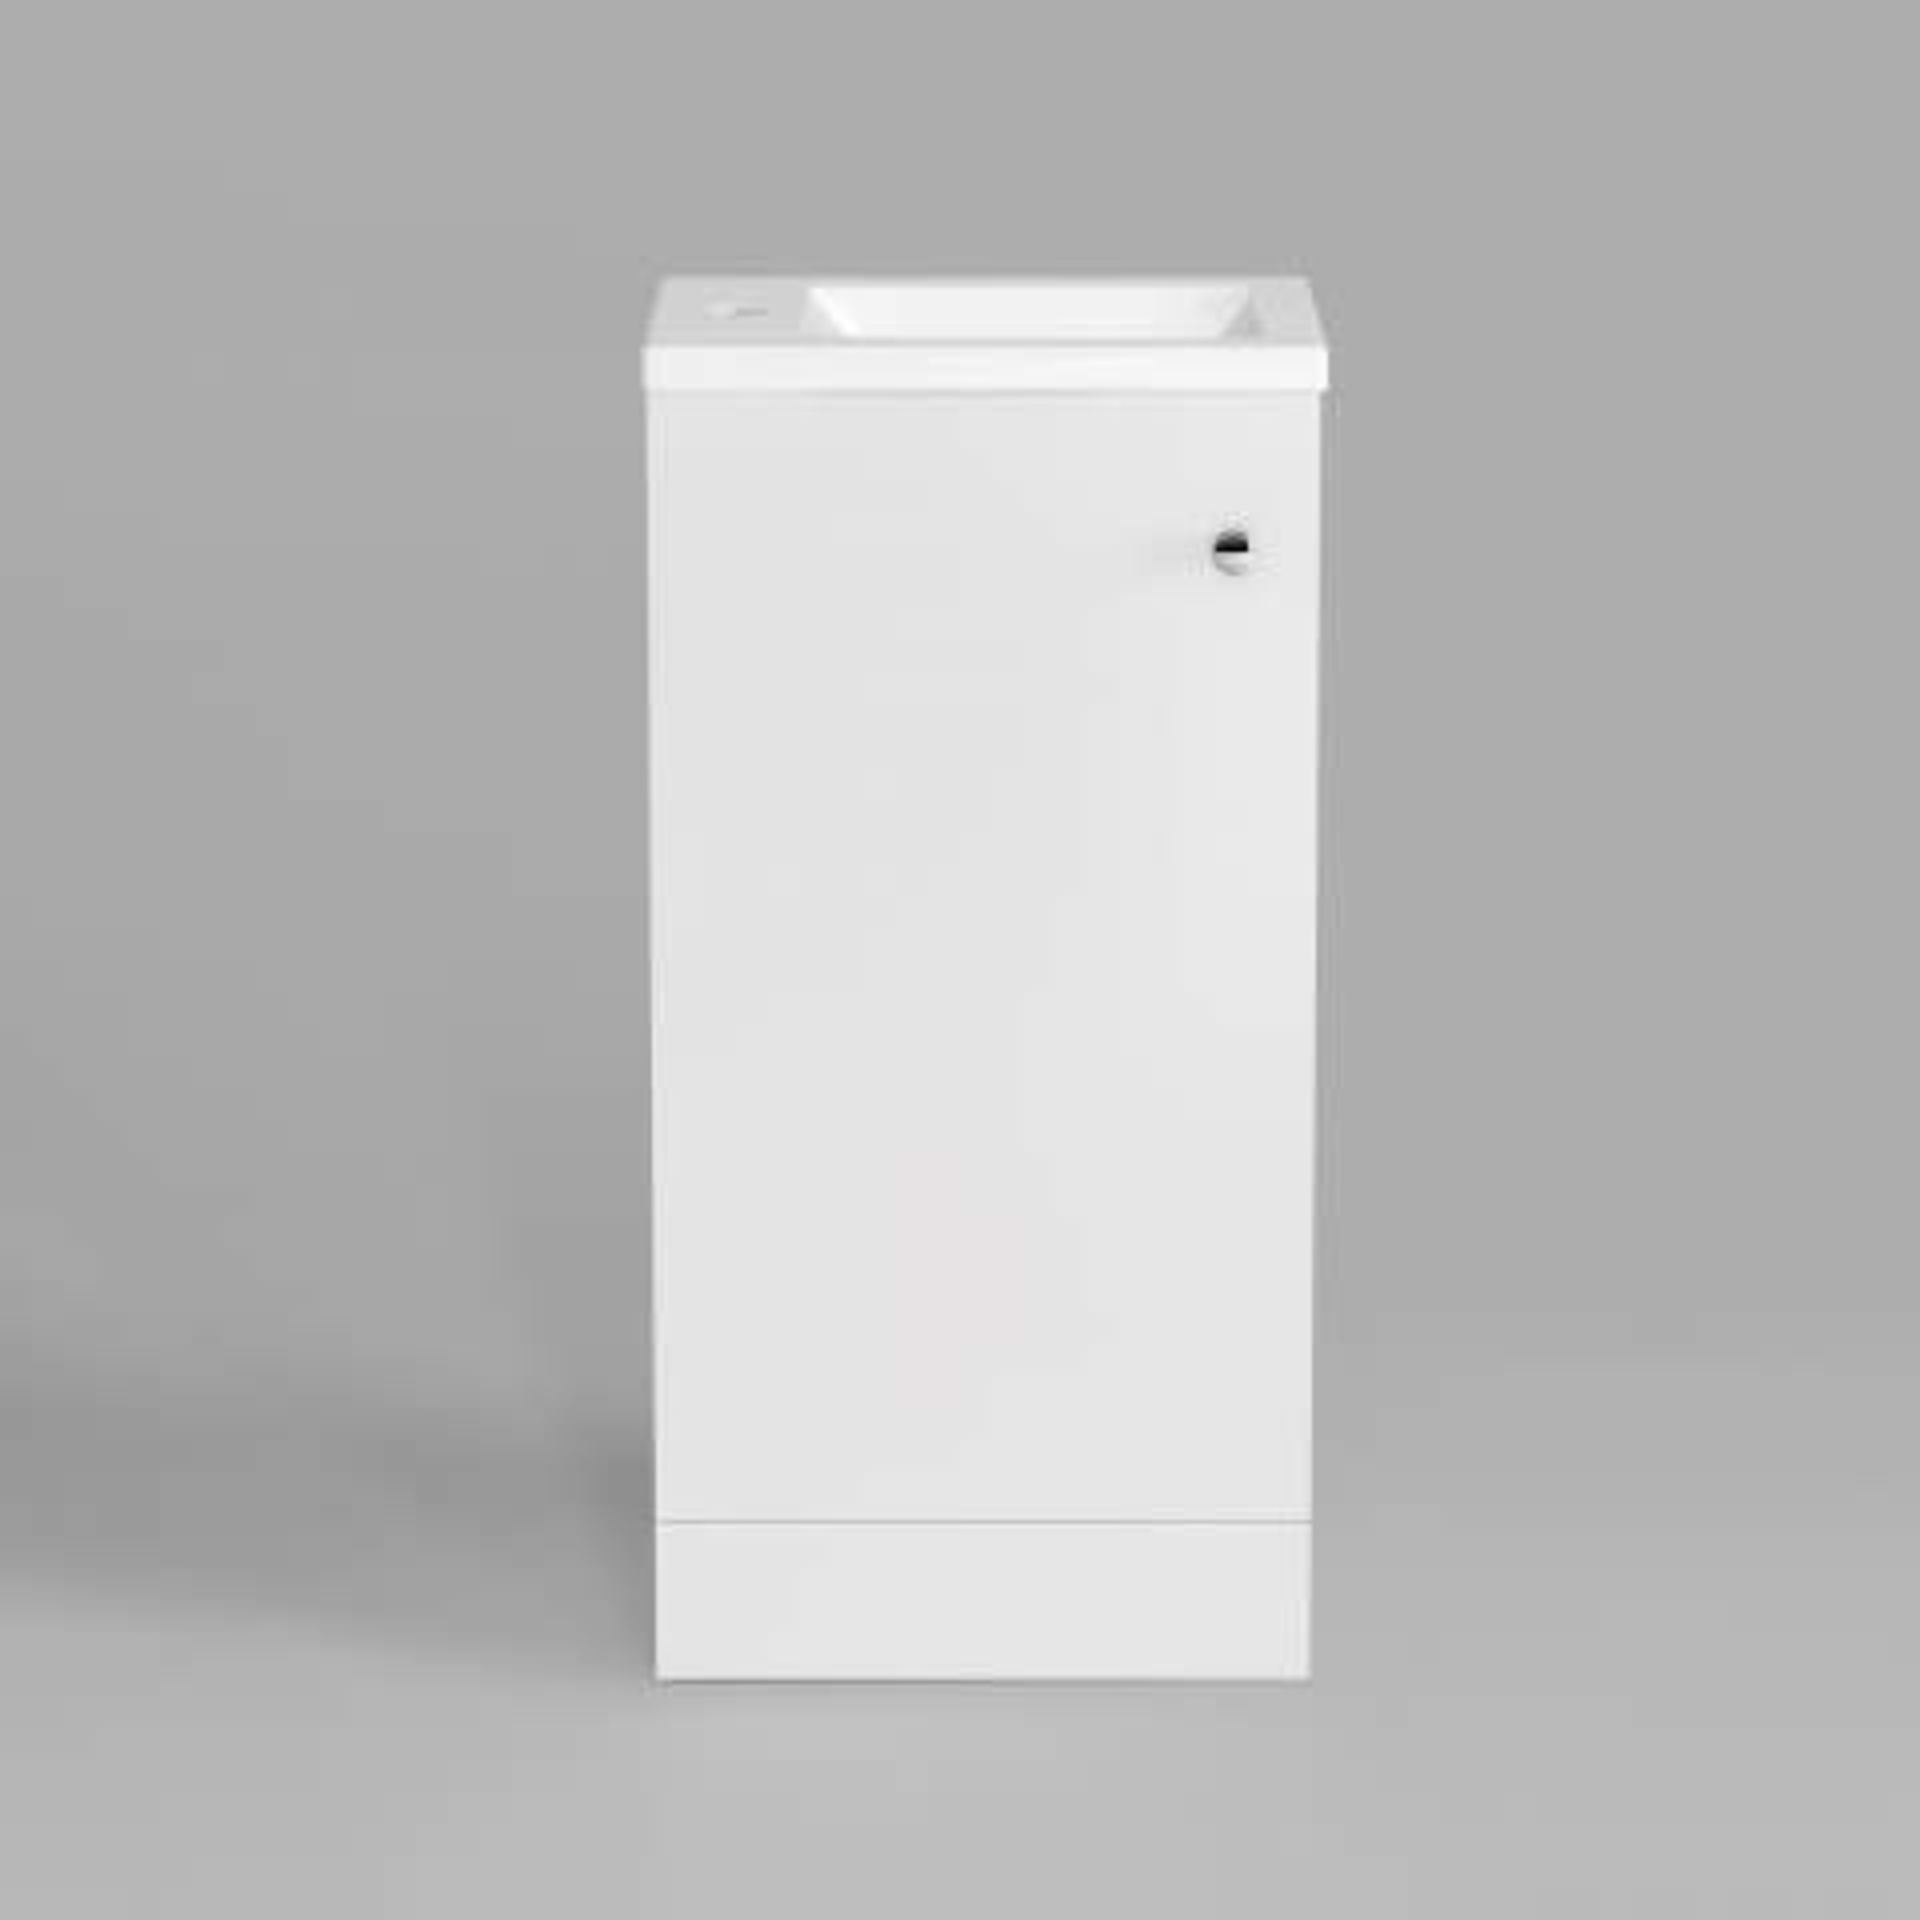 (K183) 400mm Blanc Matte White Basin Unit - Floor Standing. RRP £199.99. With its contemporary, - Image 4 of 4